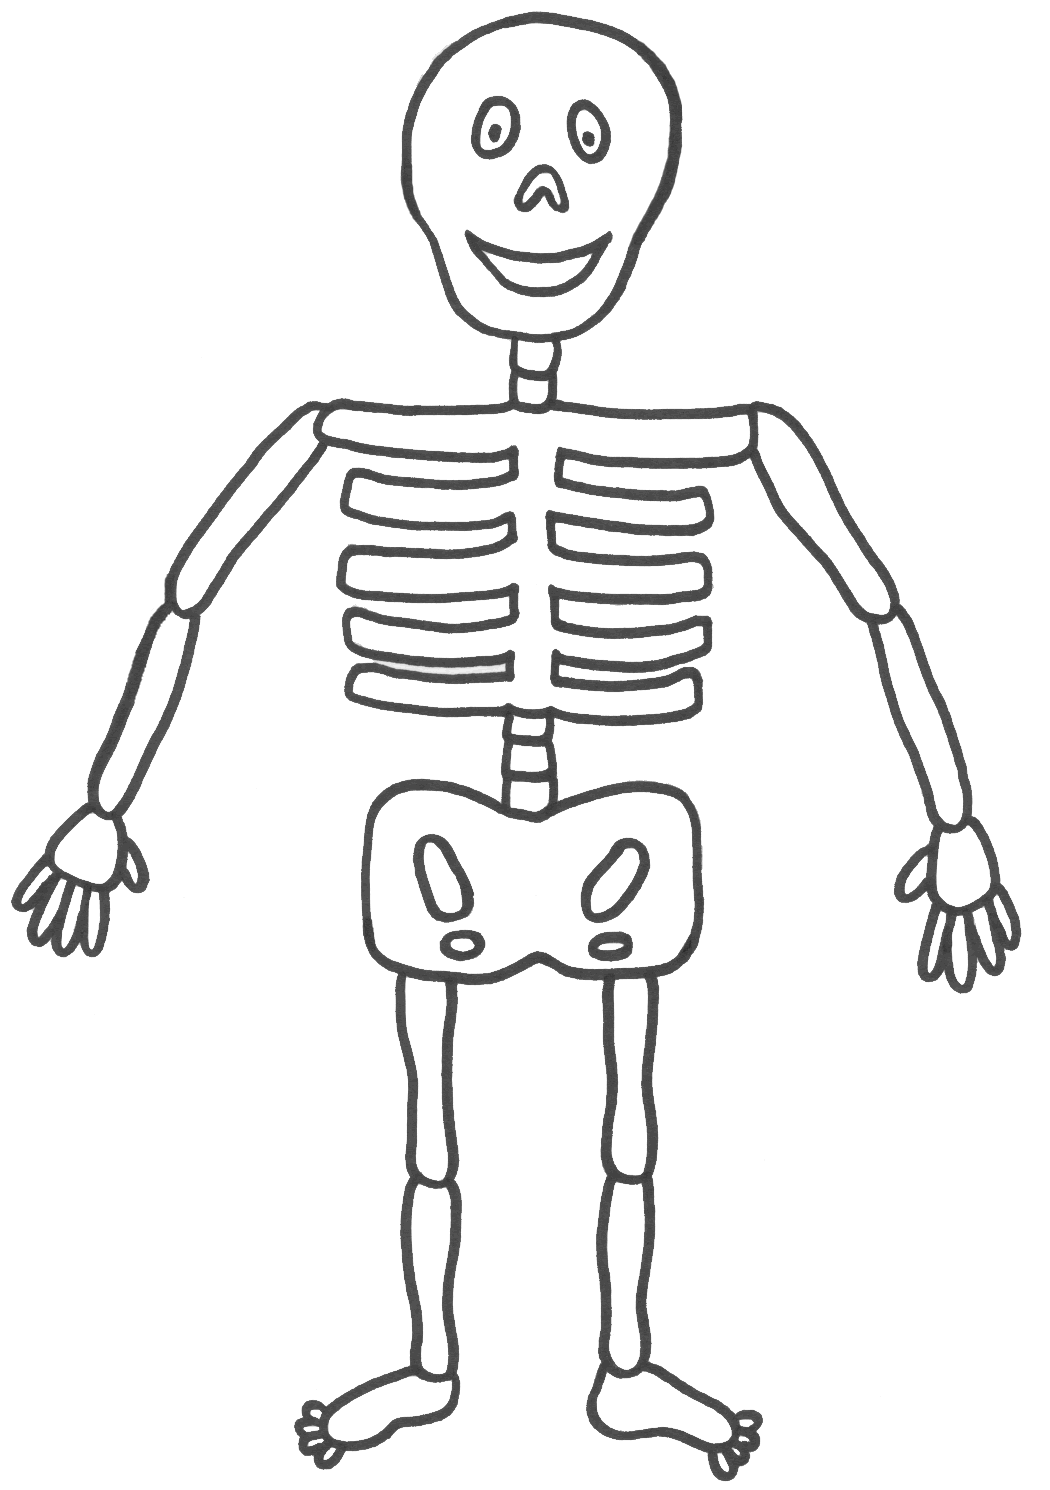 skeleton-picture-for-kids-cliparts-co